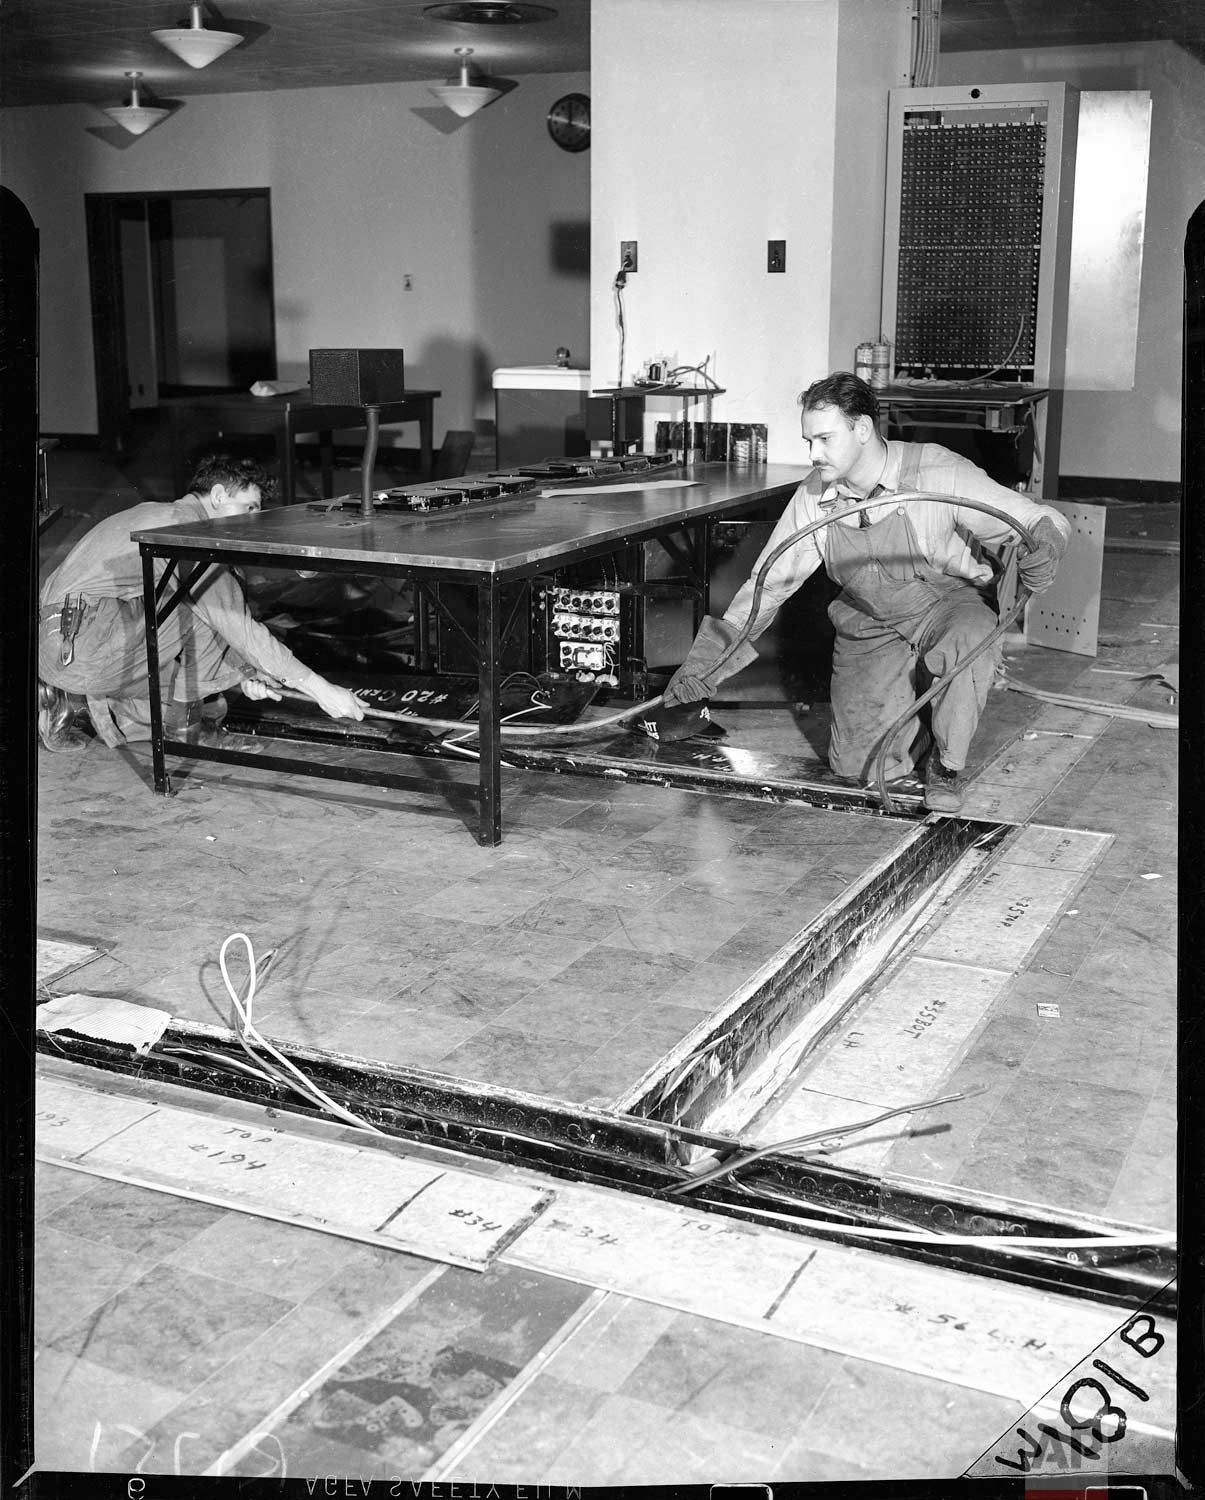  Workers lay cable in floor channels in the market department at Associated Press in the new AP building at Rockefeller Center, New York, in 1938. The market department switchboard and main market operating table are shown.(AP Photo/Corporate Archive